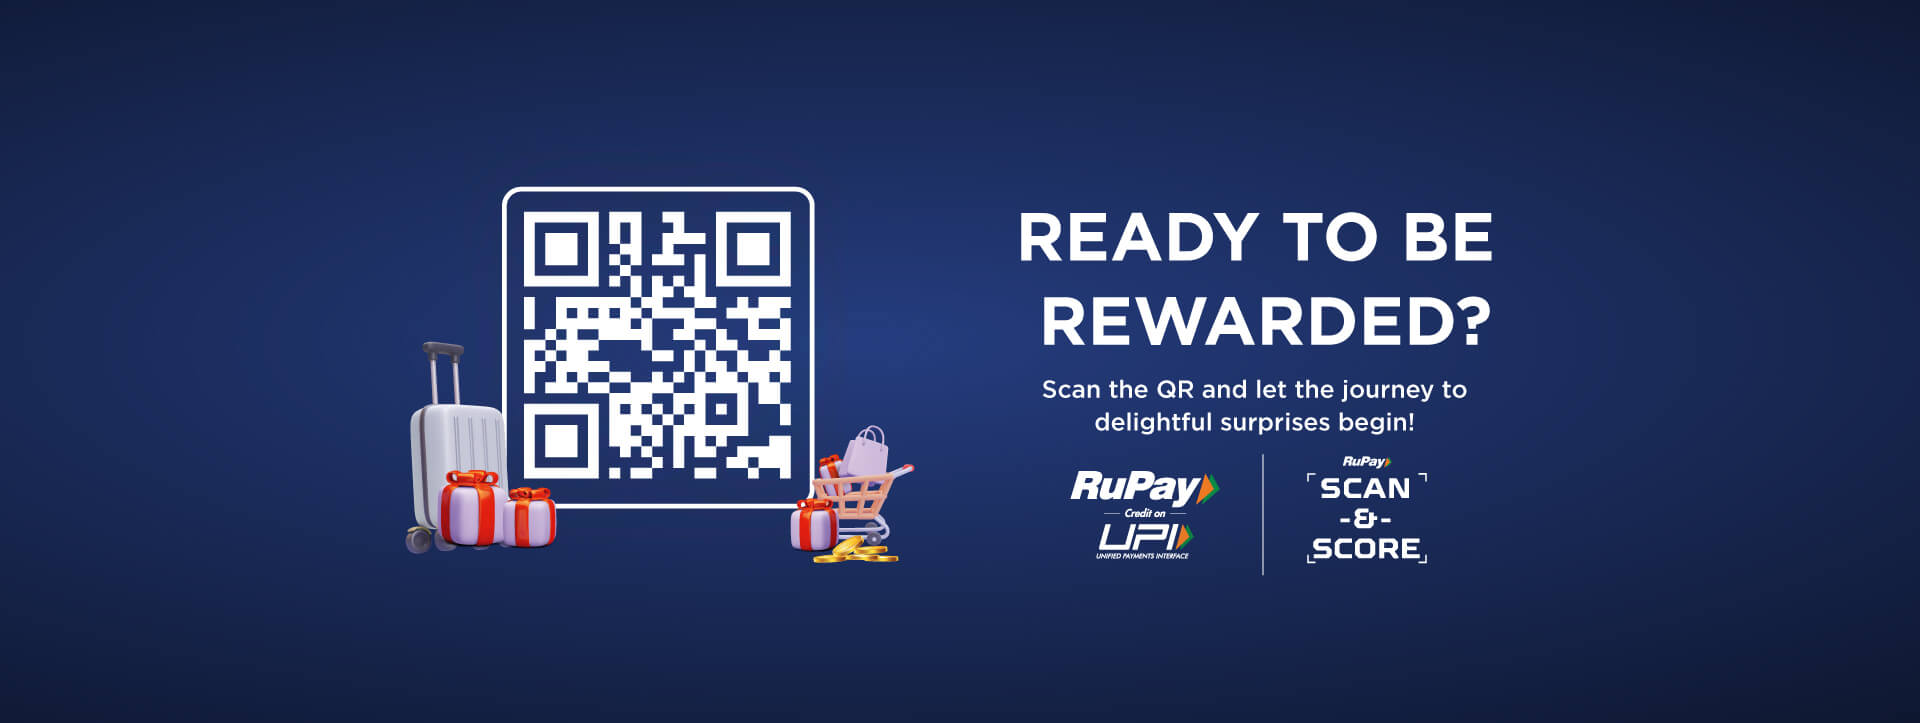 rupay scan and score